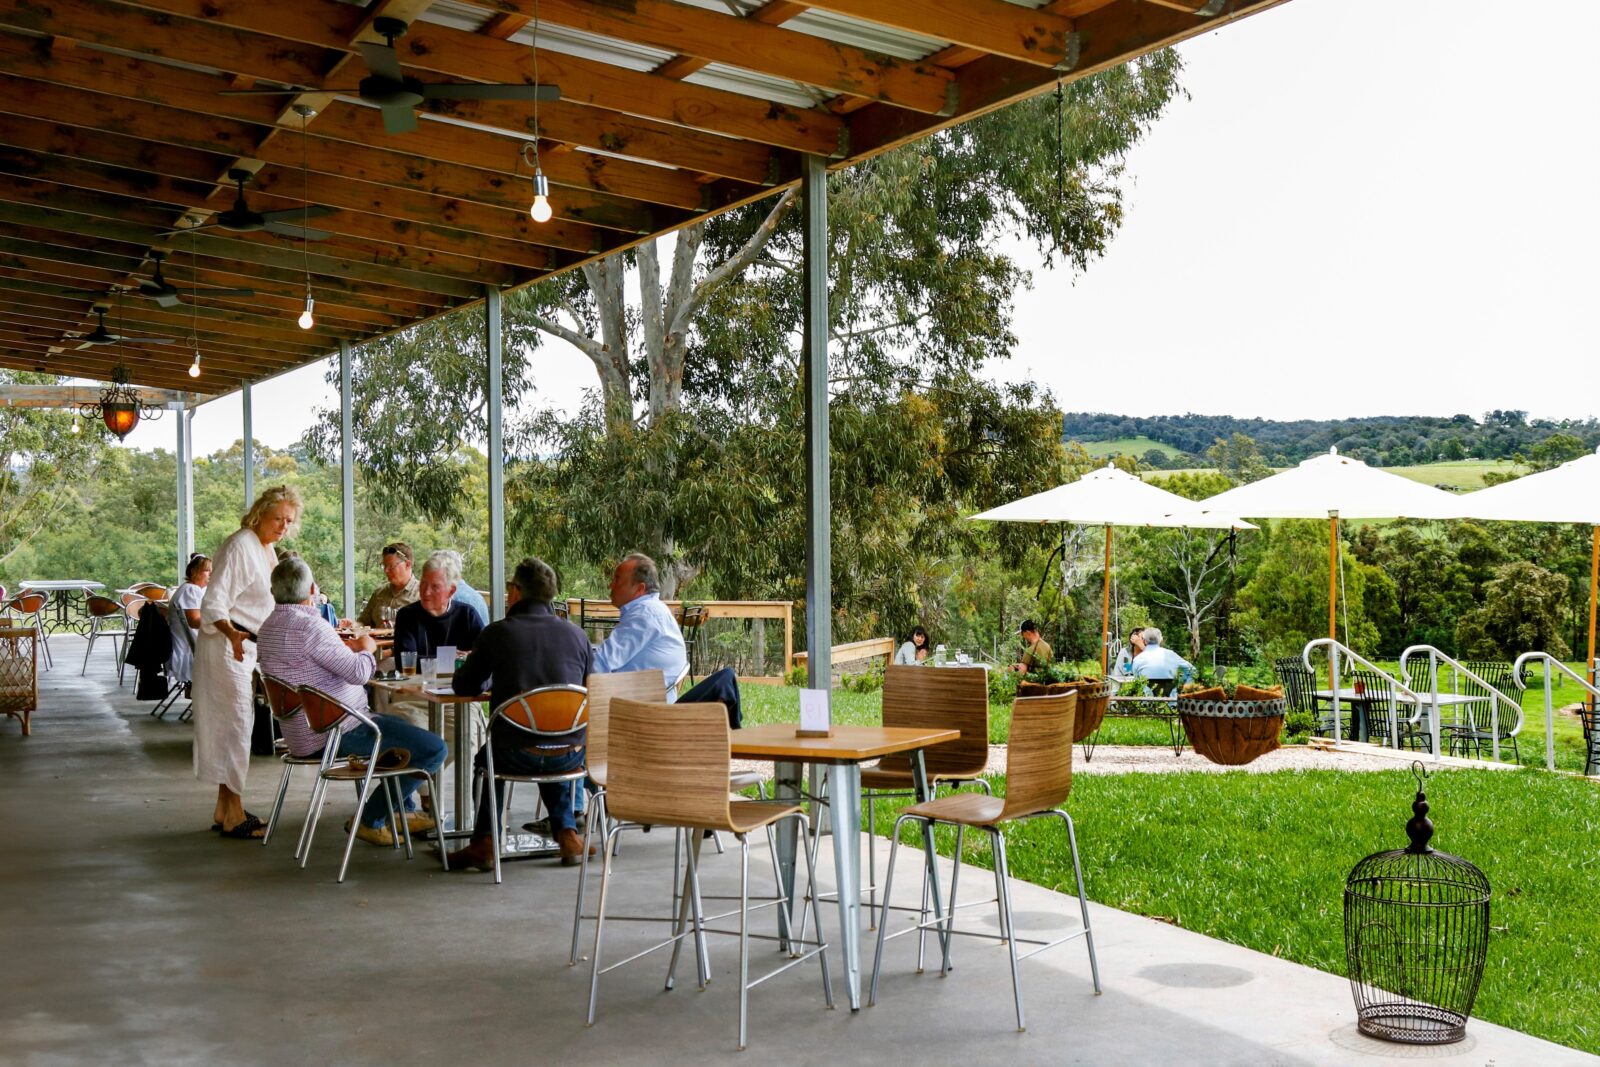 Glenmaggie Wines; Central Gippsland Wines; Gippsland; Gippsland wines; things to do in Gippsland